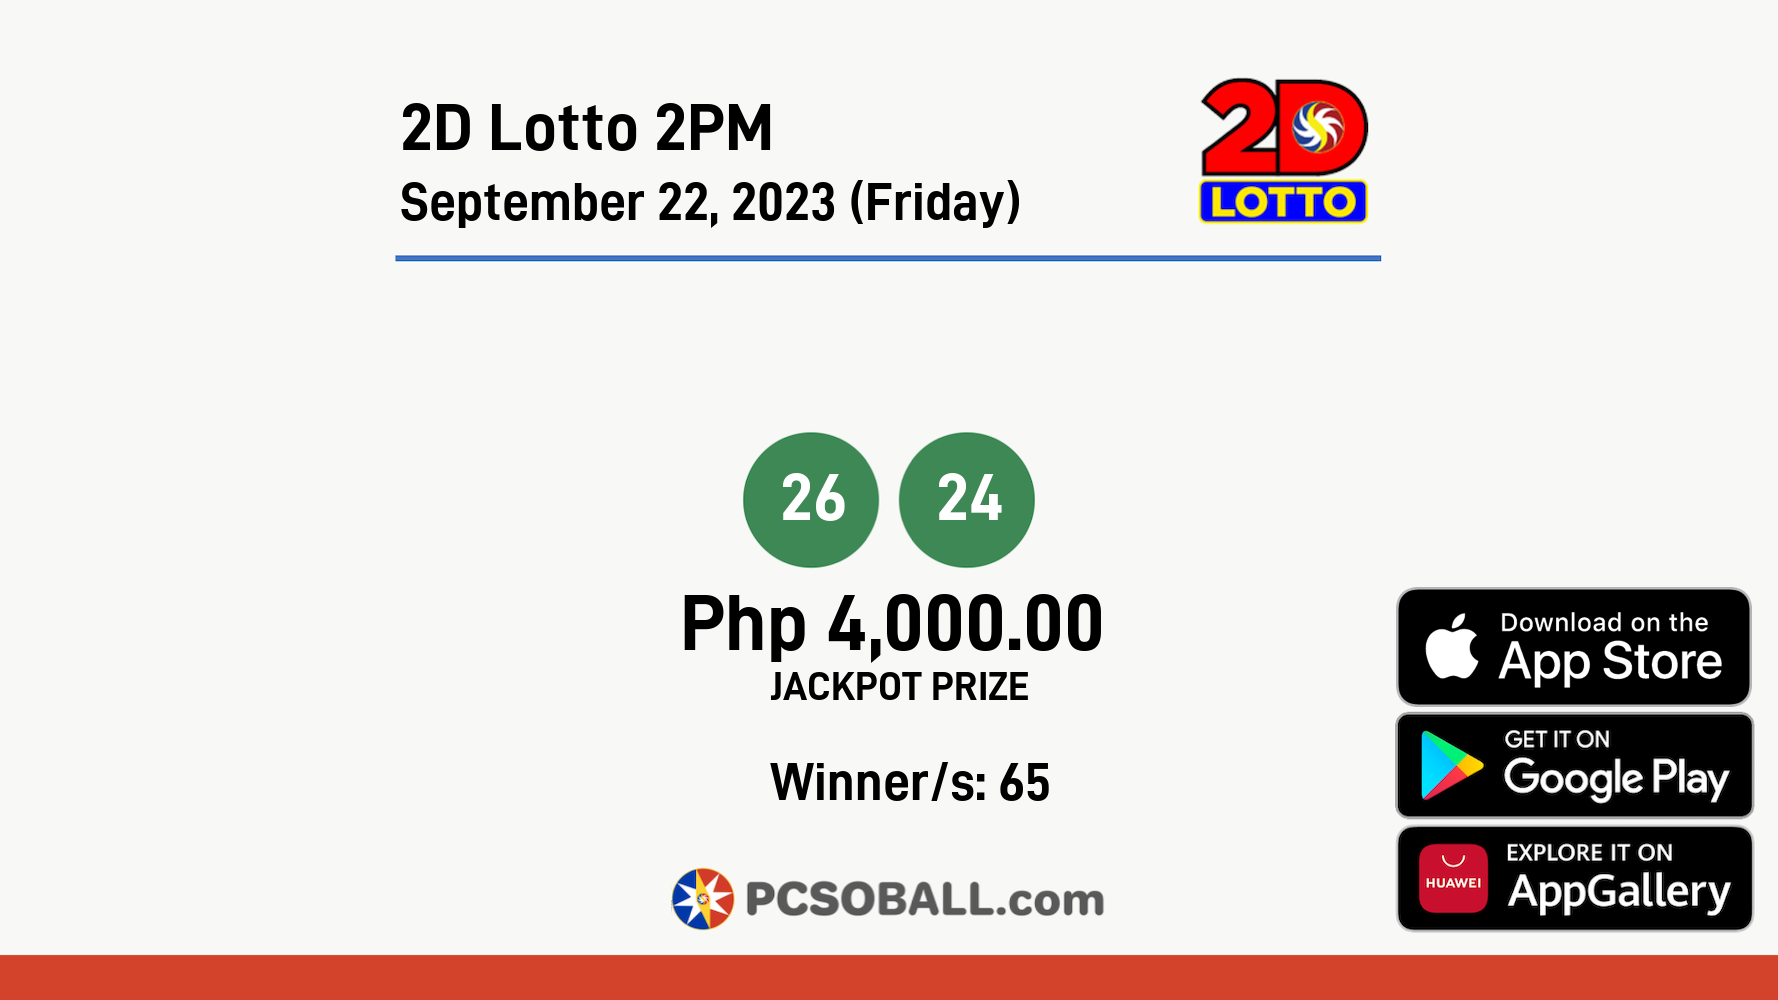 2D Lotto 2PM September 22, 2023 (Friday) Result